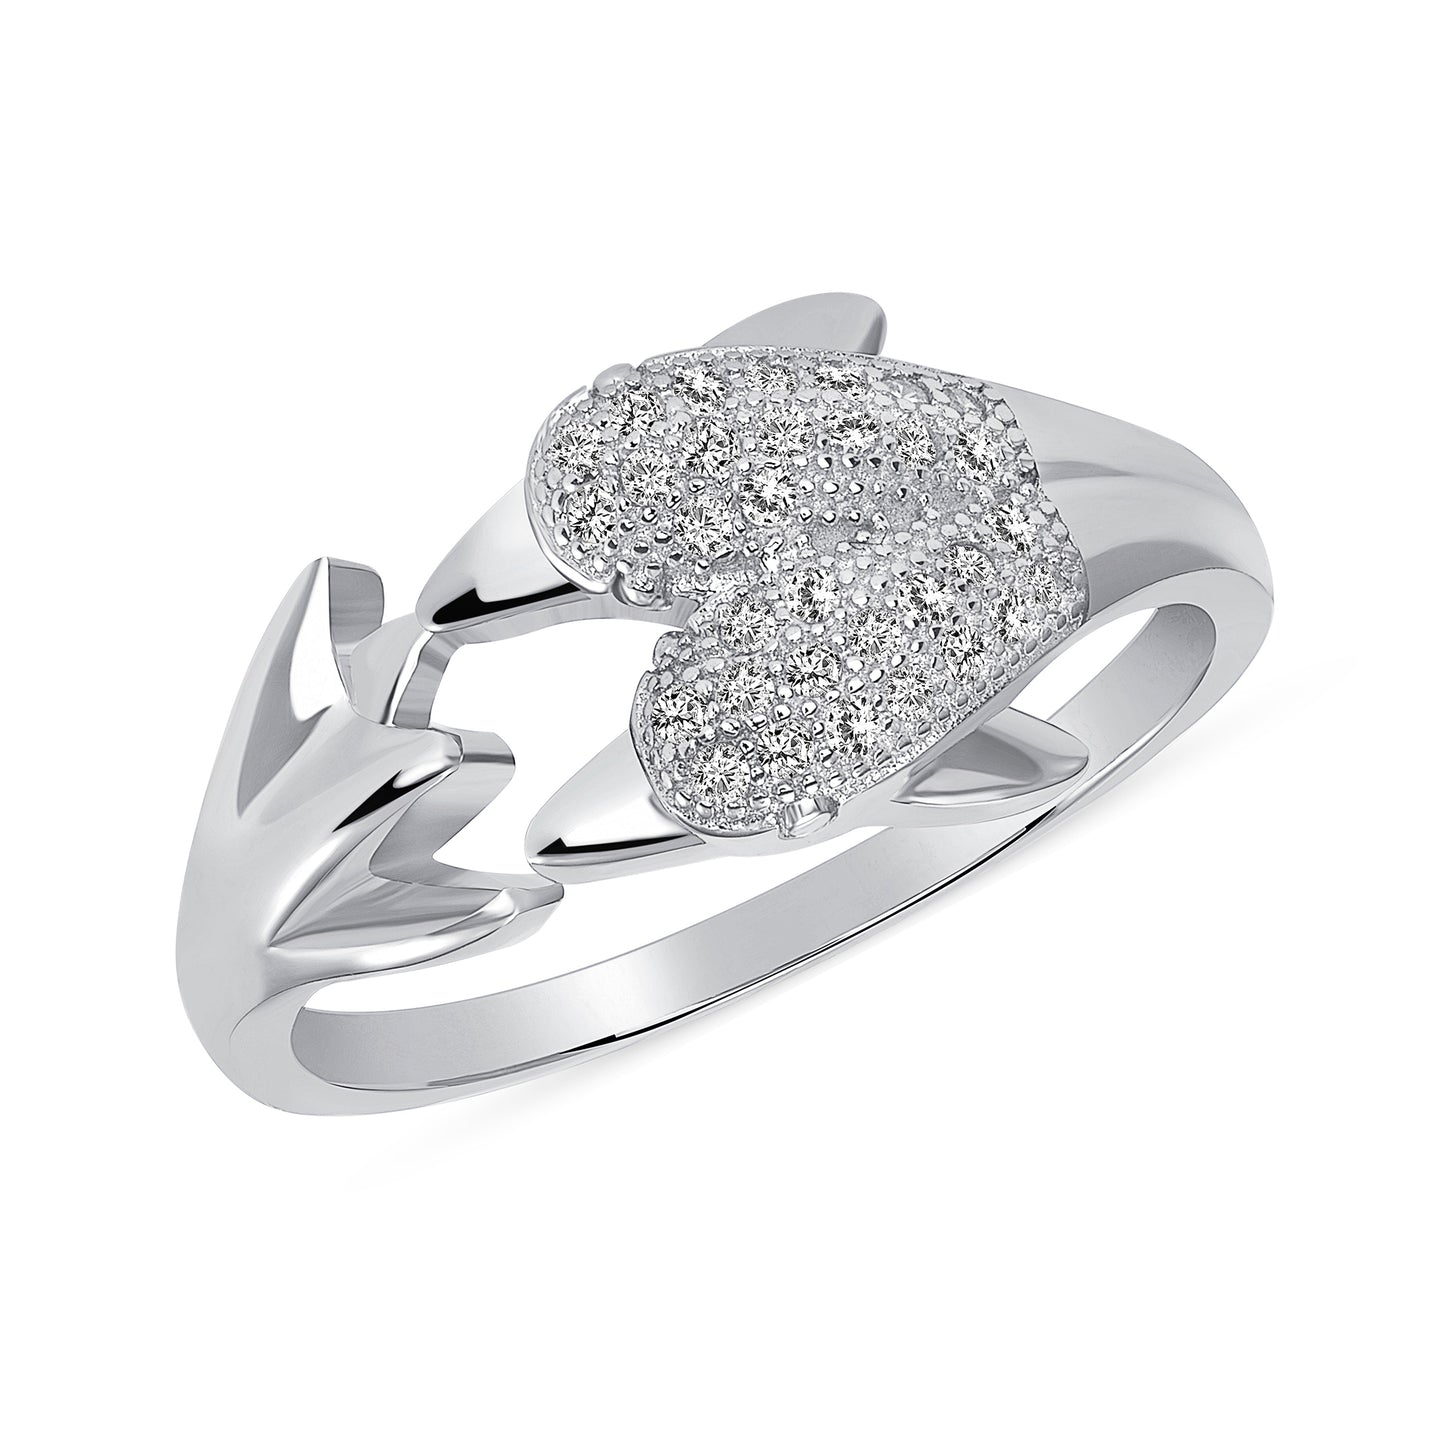 DGR2070. Silver 925 Rhodium Plated Cubic Zirconia Double Dolphin Ring